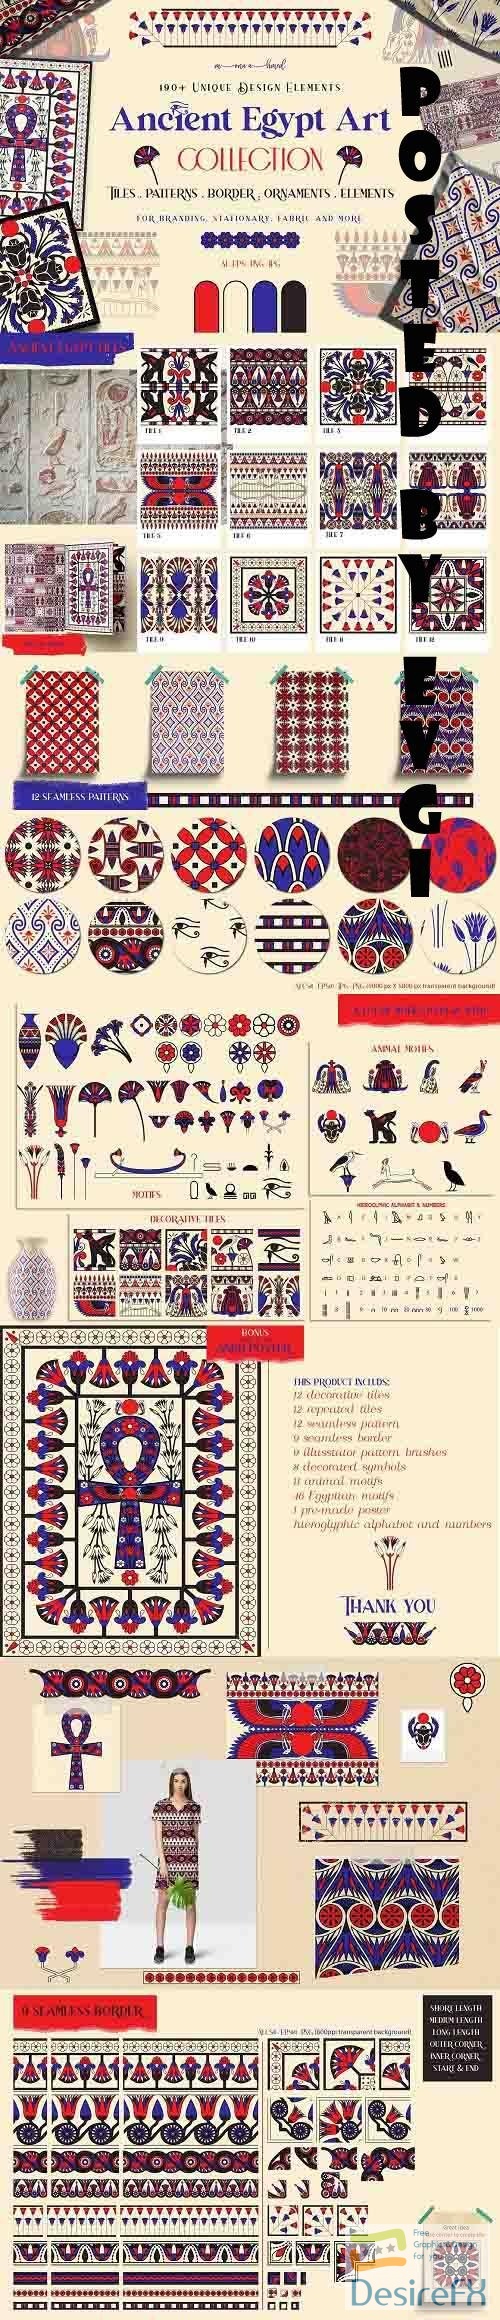 Ancient Egypt Art collection - 6225319